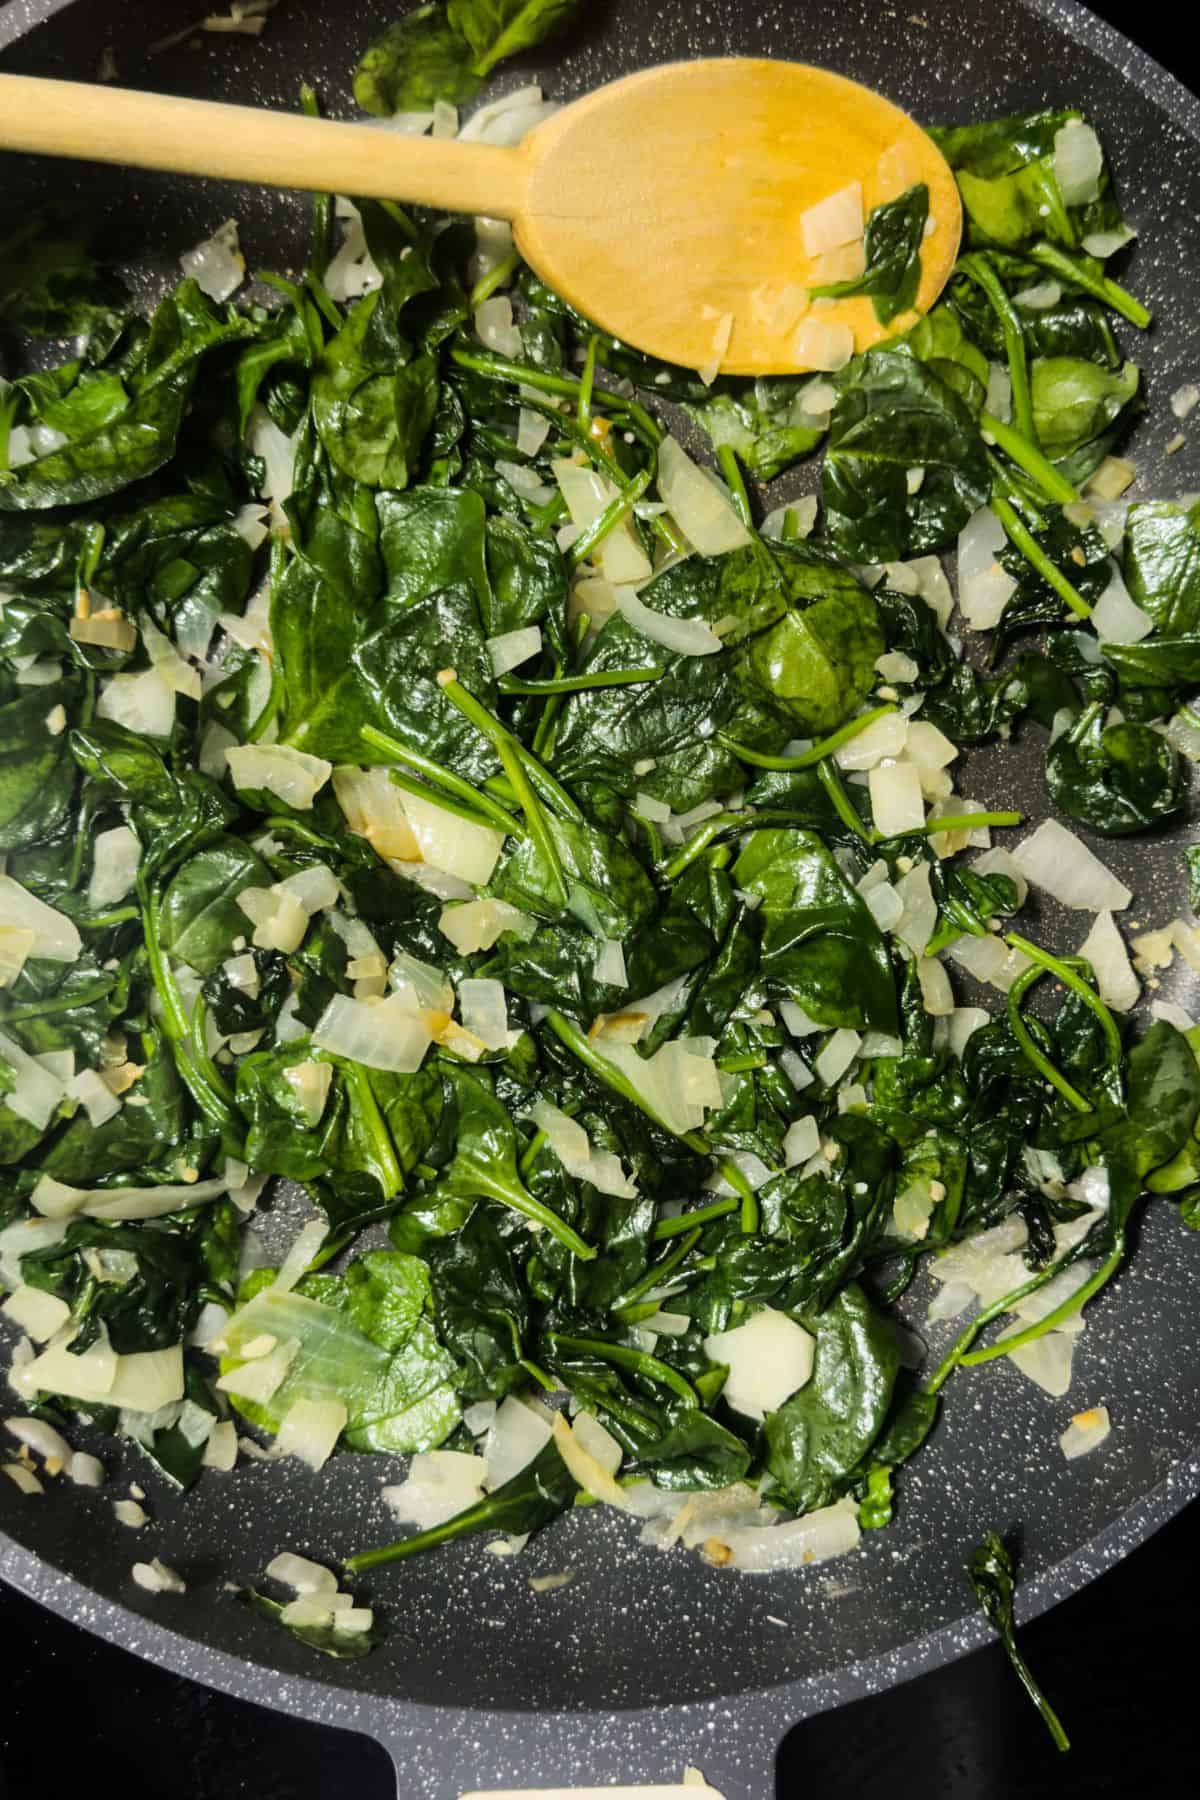 Spinach and onions being sautéed in a skillet for the Keto Spinach Artichoke Chicken Casserole filling.